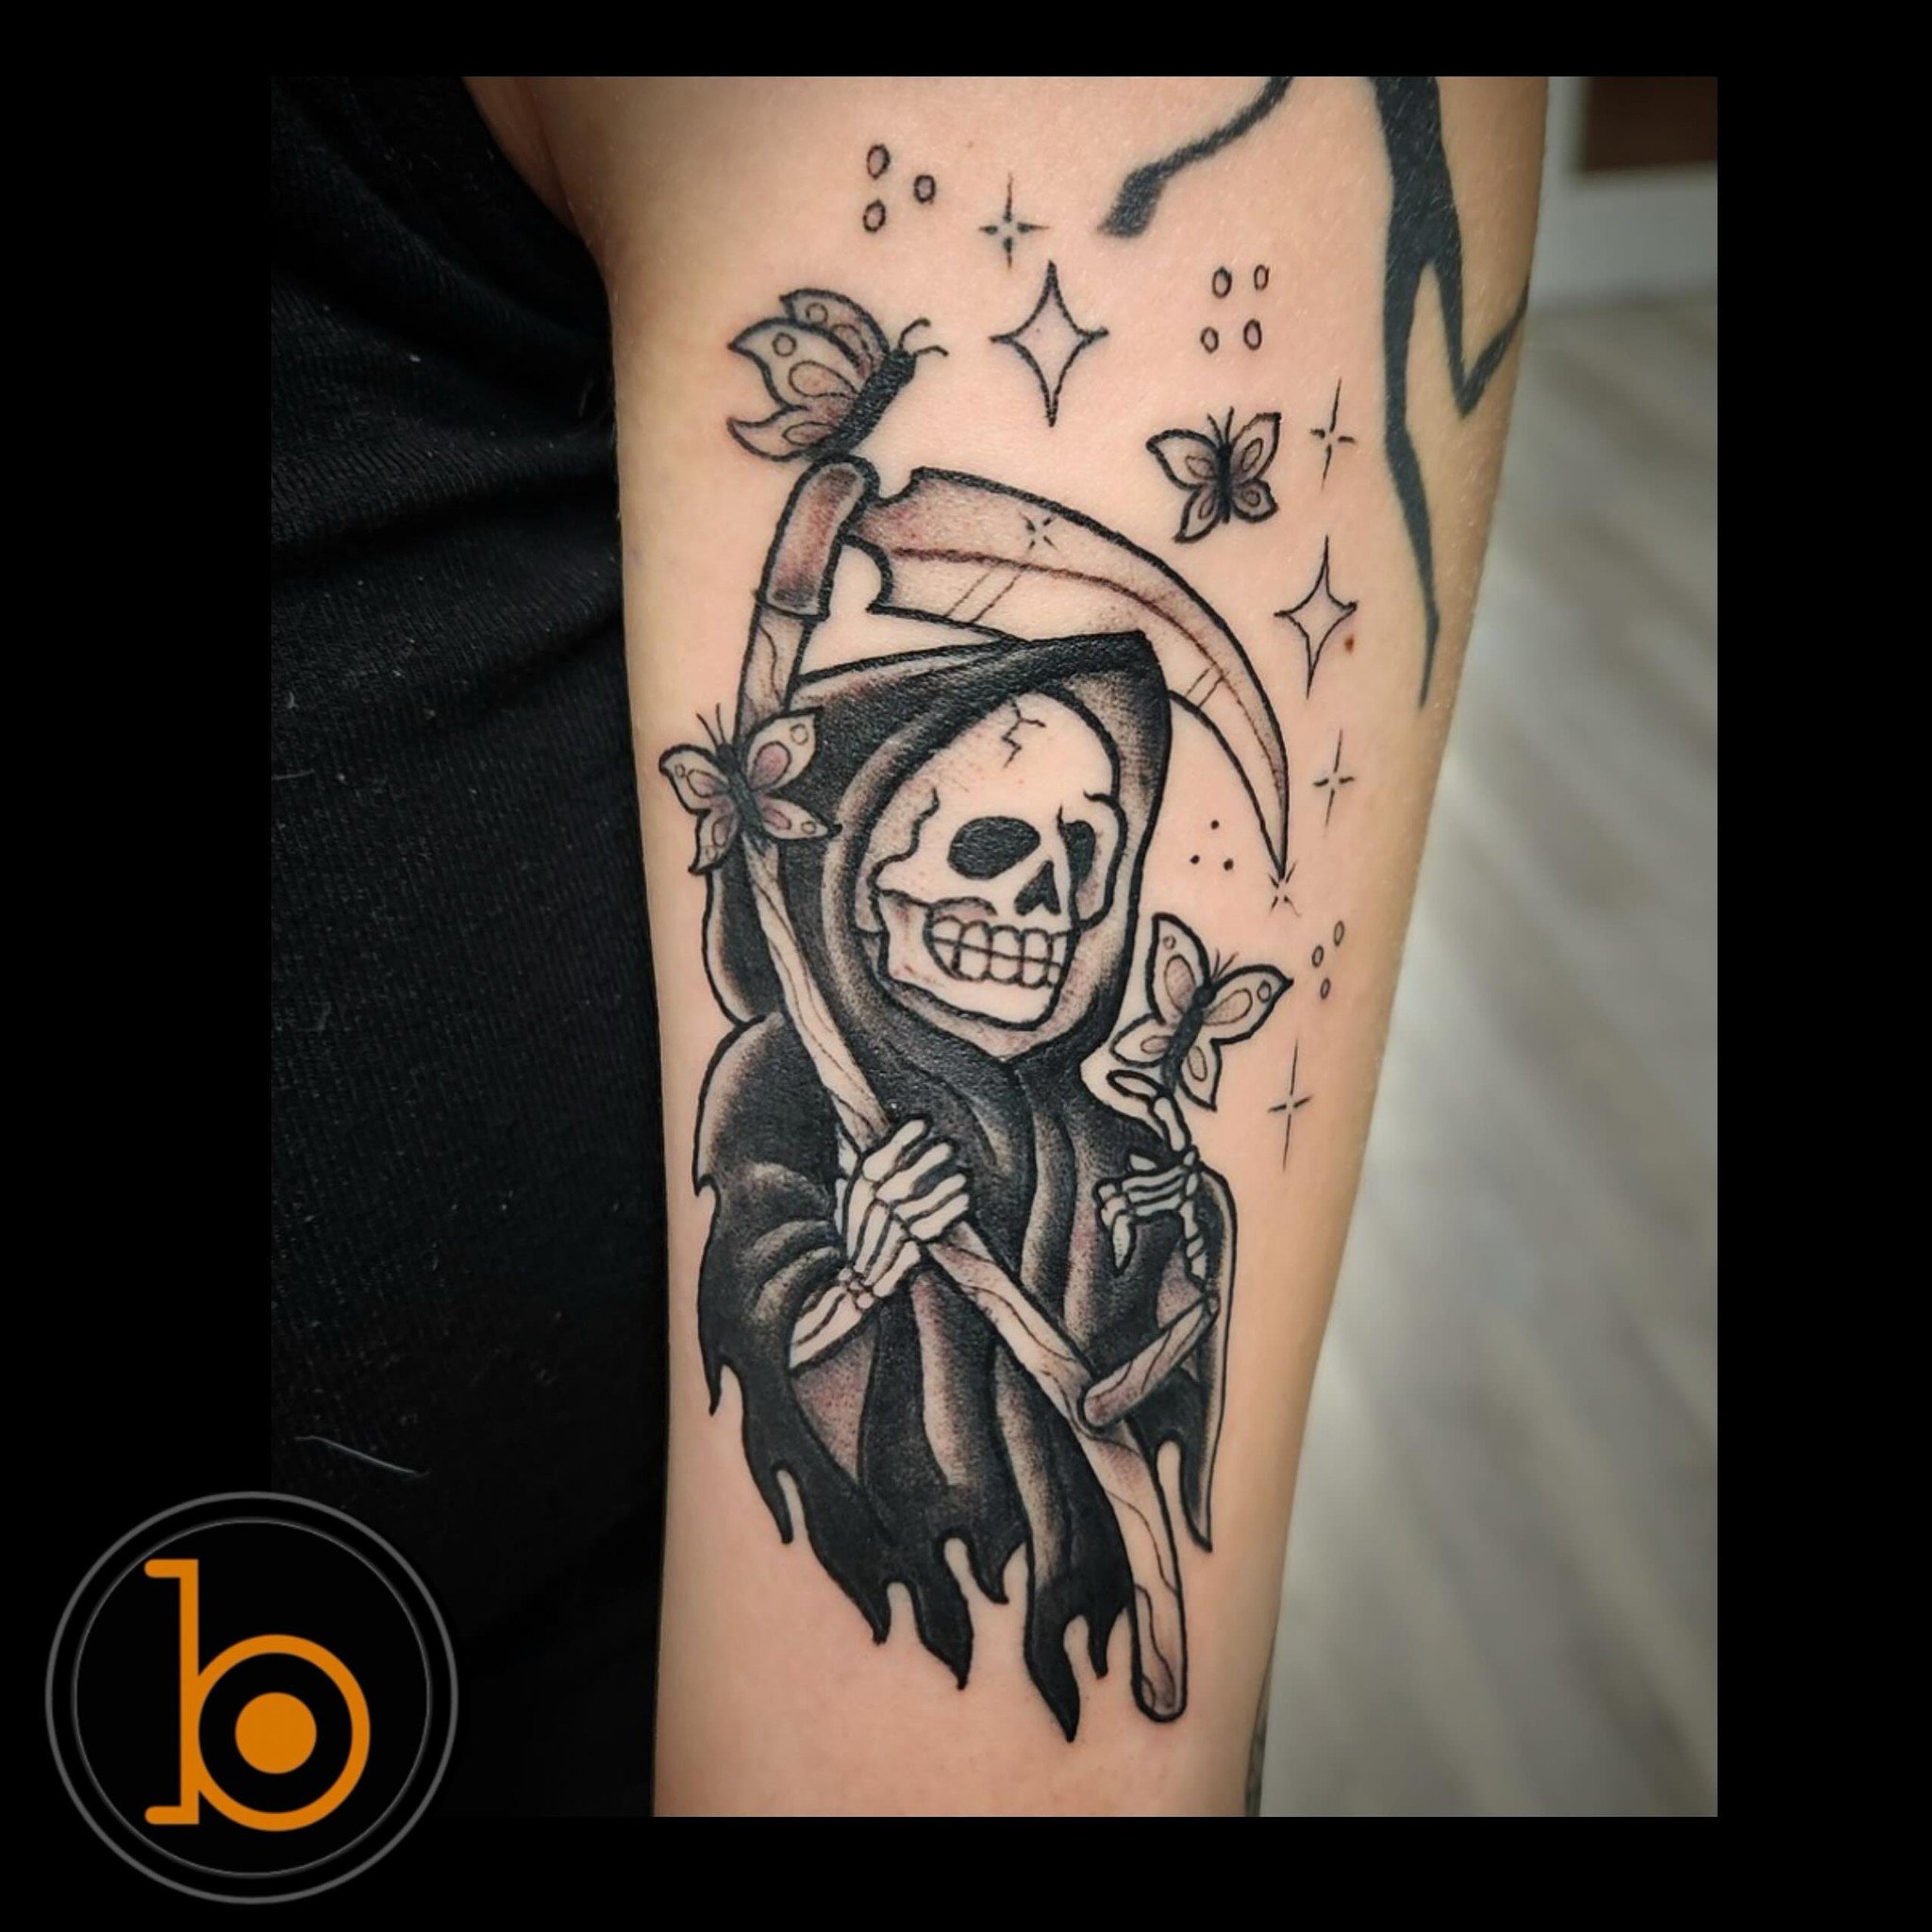 Do y&rsquo;all think the butterflies survived this encounter? Reaper by resident artist @steevdraws 💀🦋
➖➖➖➖➖➖➖➖➖➖➖➖➖➖➖➖➖
Blueprint Gallery
138 Russell St
 Hadley MA 01035
📱(413)-387-0221 
WALK-INS WELCOME 
🕸️ www.blueprintgallery.com 🕸️
⬇️⬇️⬇️⬇️